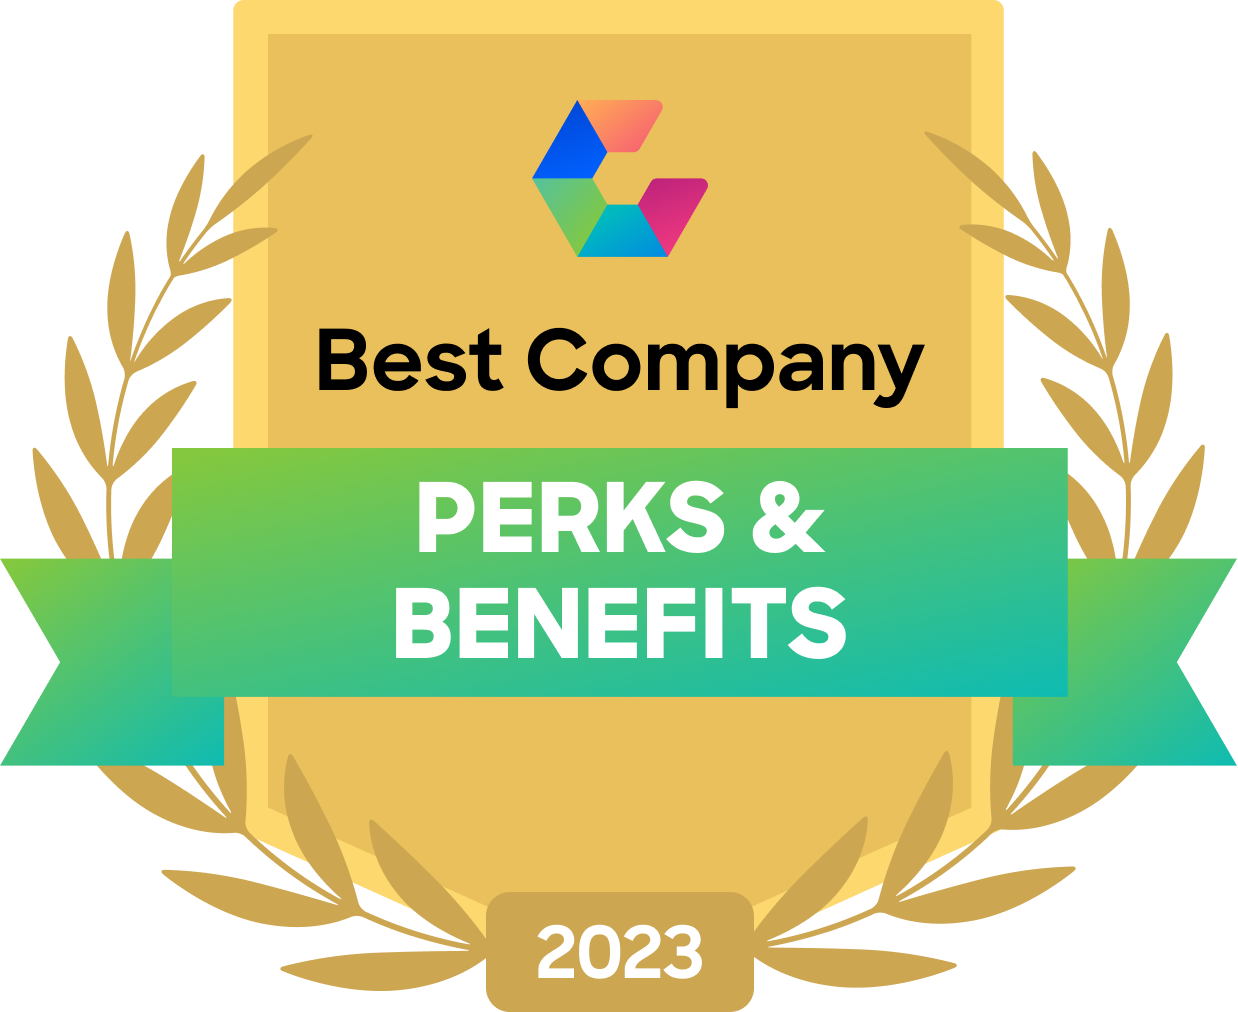 Best Company Perks and Benefits 2023